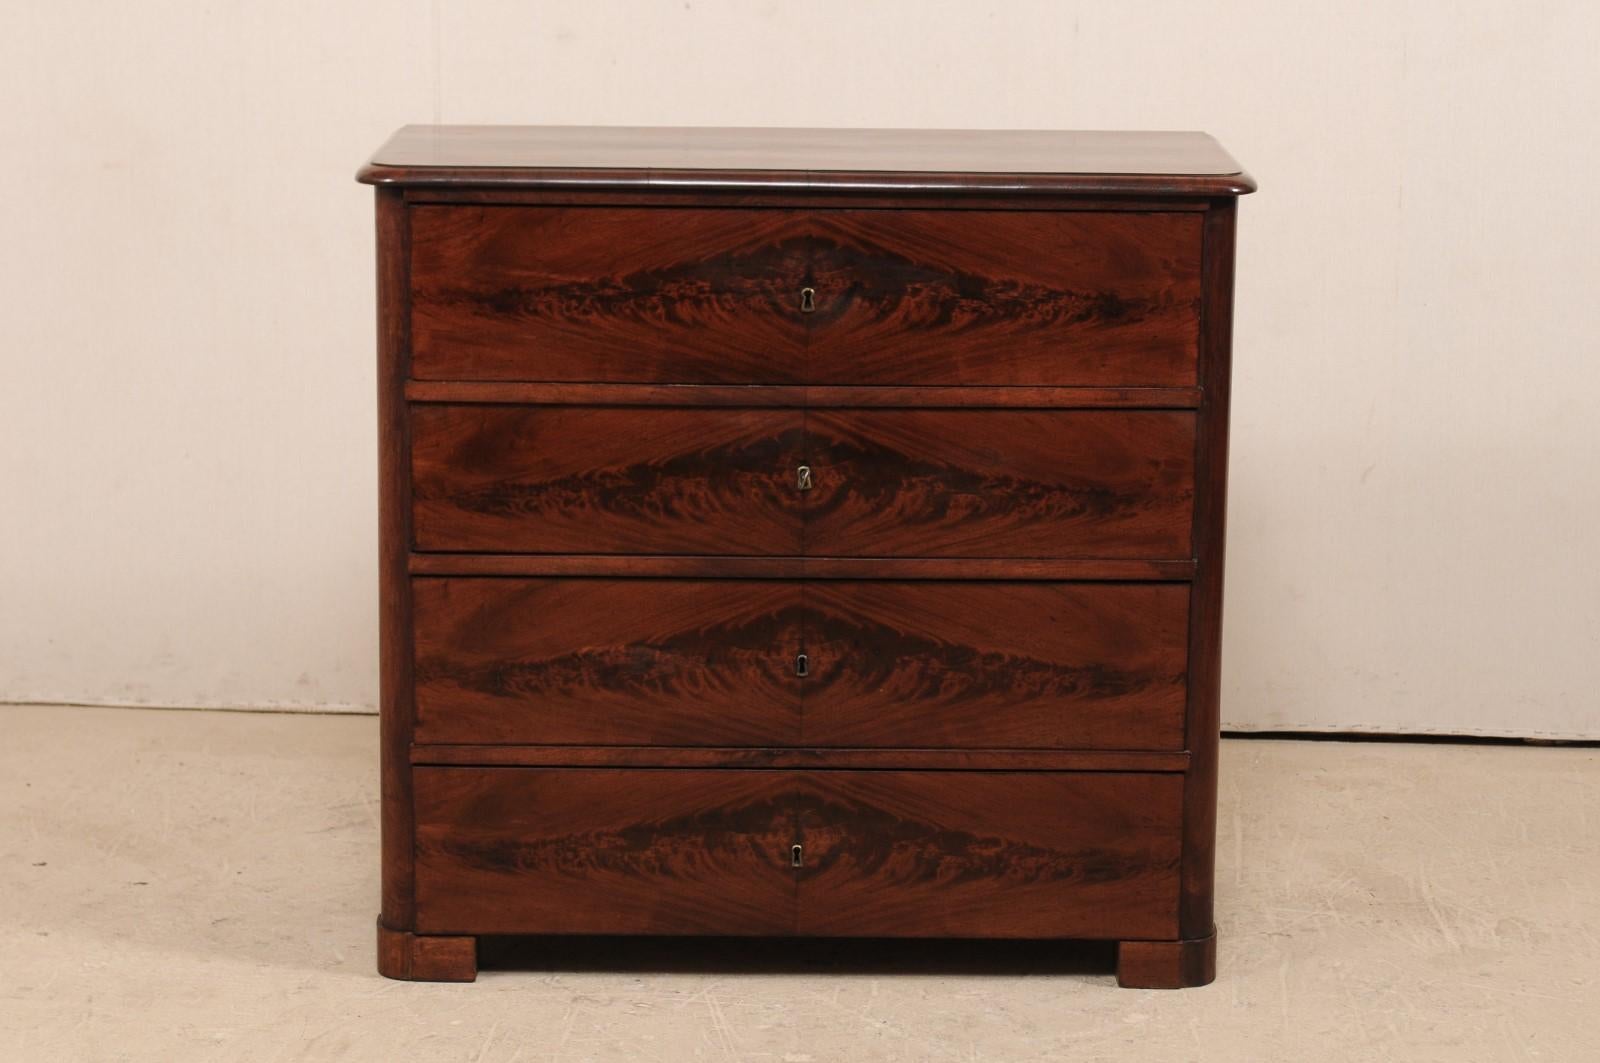 A Swedish mahogany secretary chest from the 1830s. This antique Swedish Biedermeier case piece has the appearance of being a four drawer chest at first glance. However, upon closer inspection, the upper 